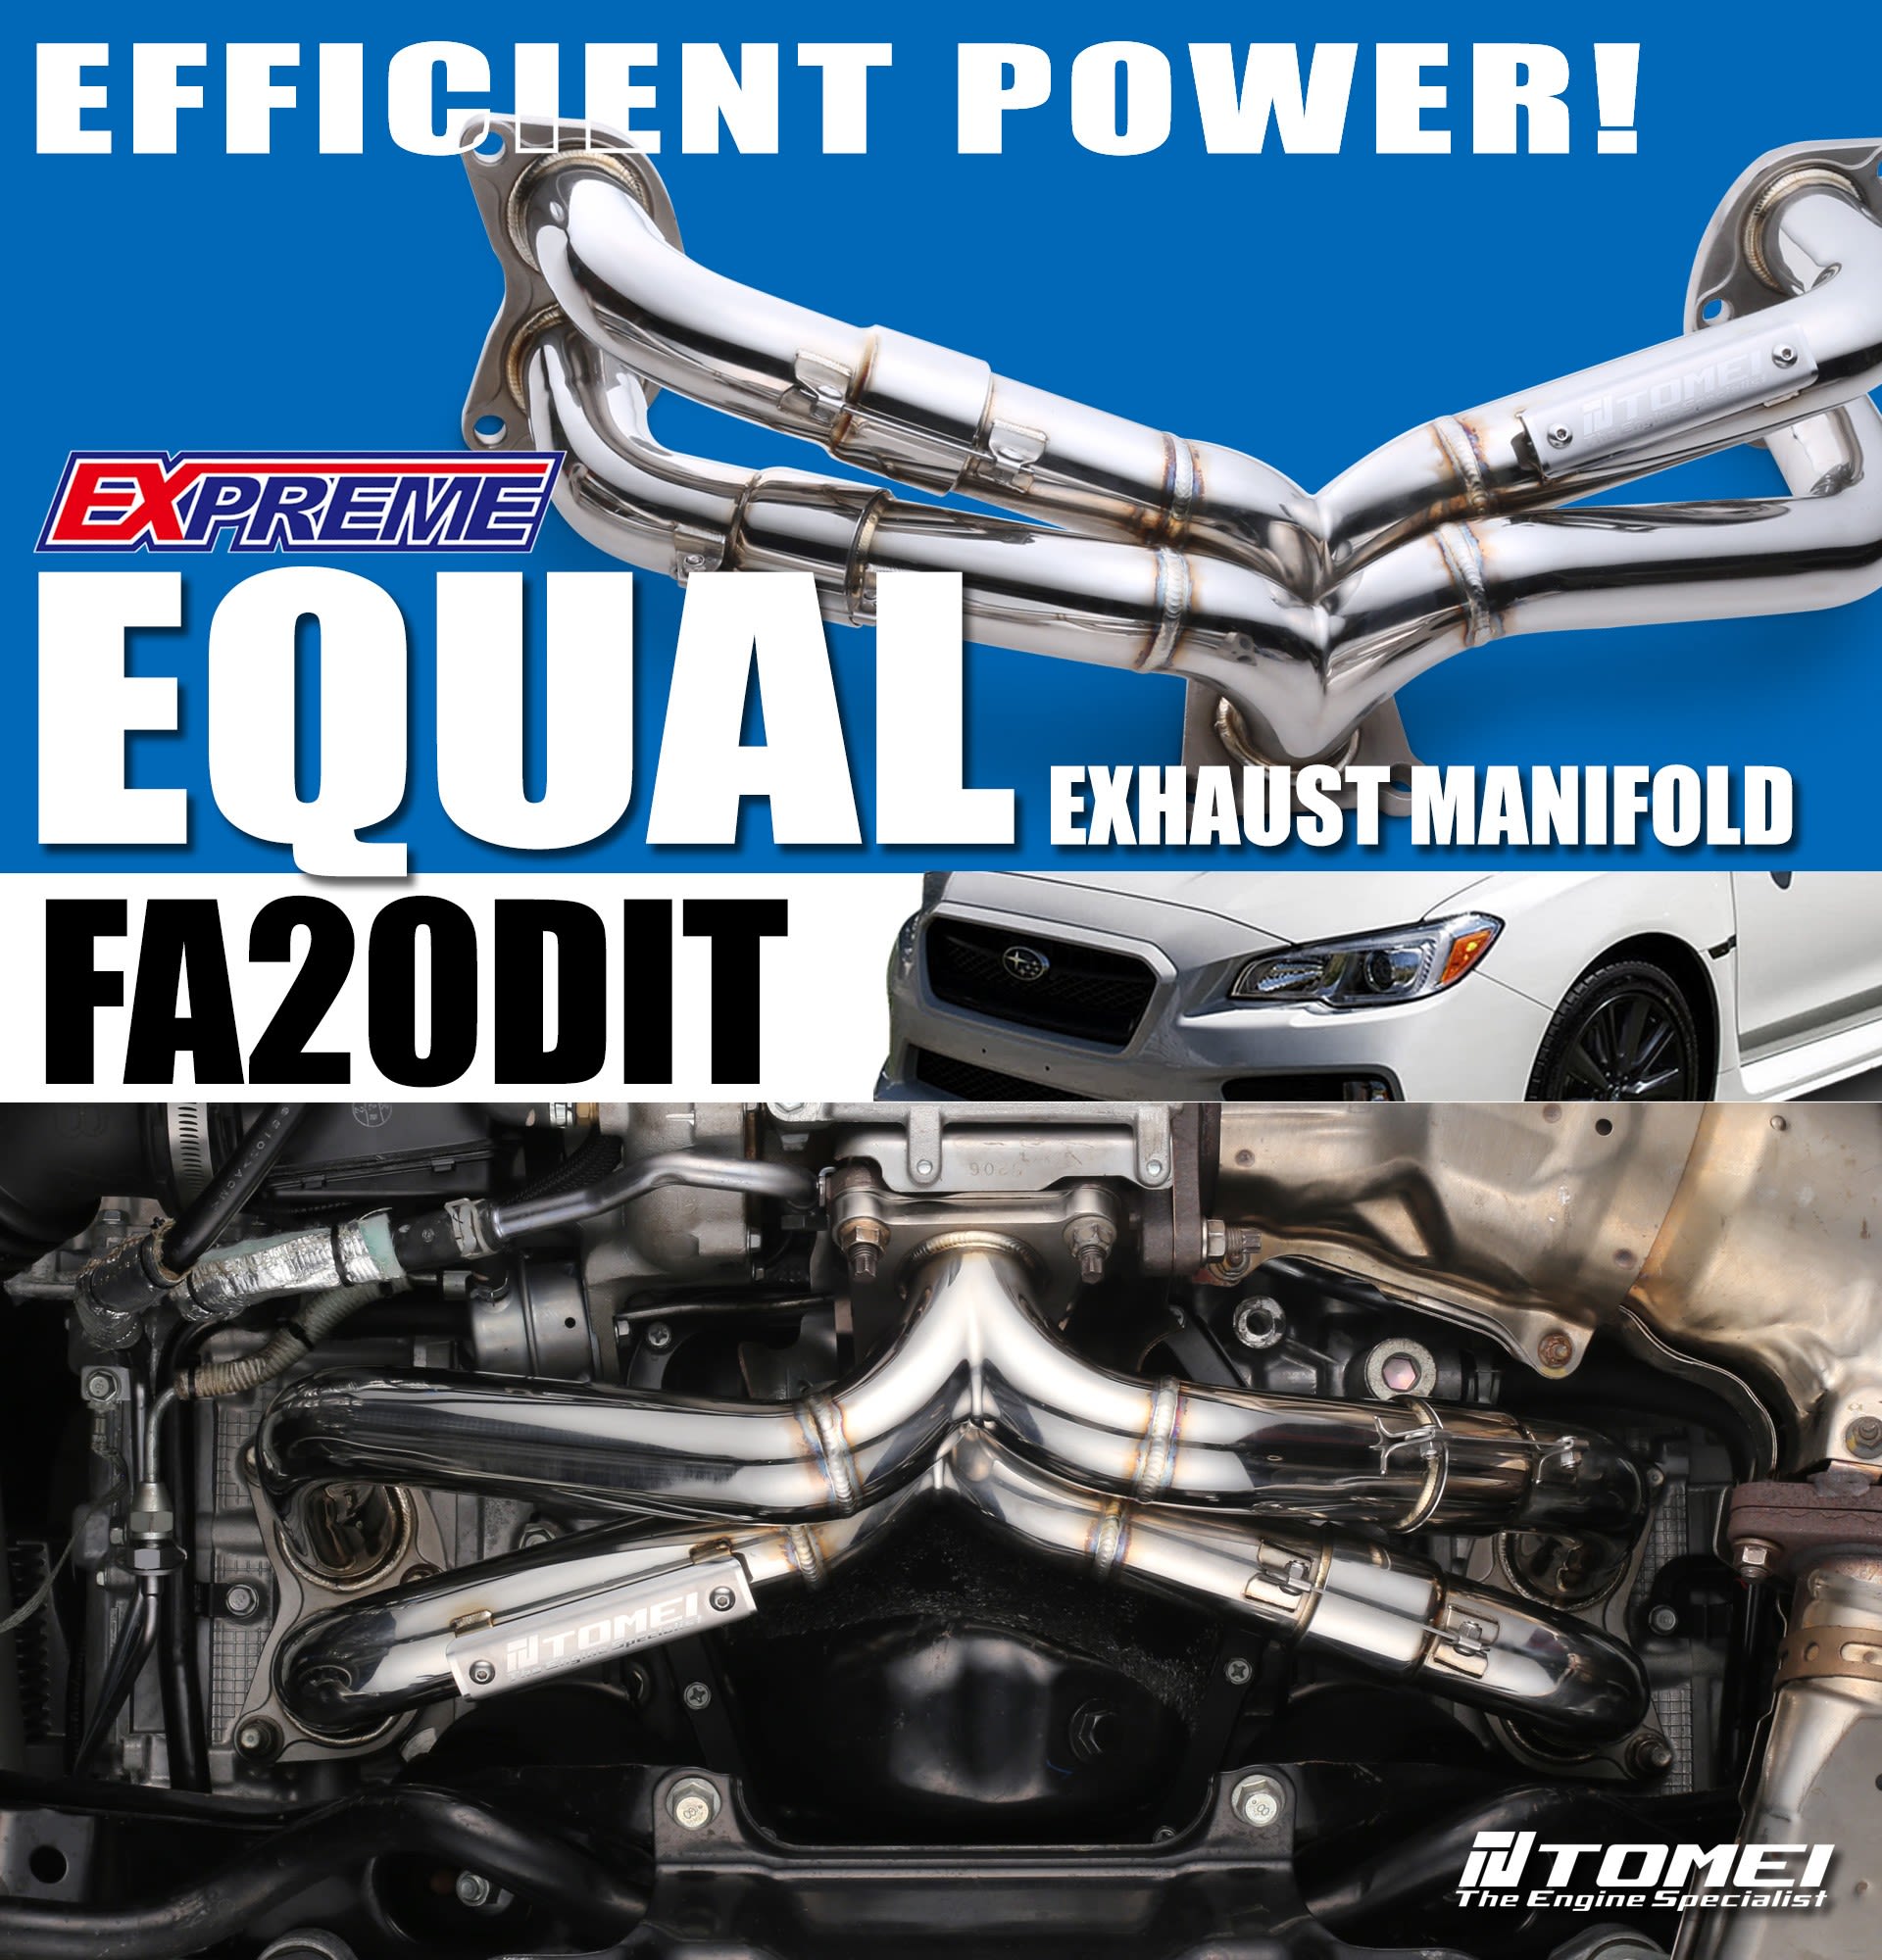 Tomei Expreme Equal Length Exhaust Manifold Kit-1